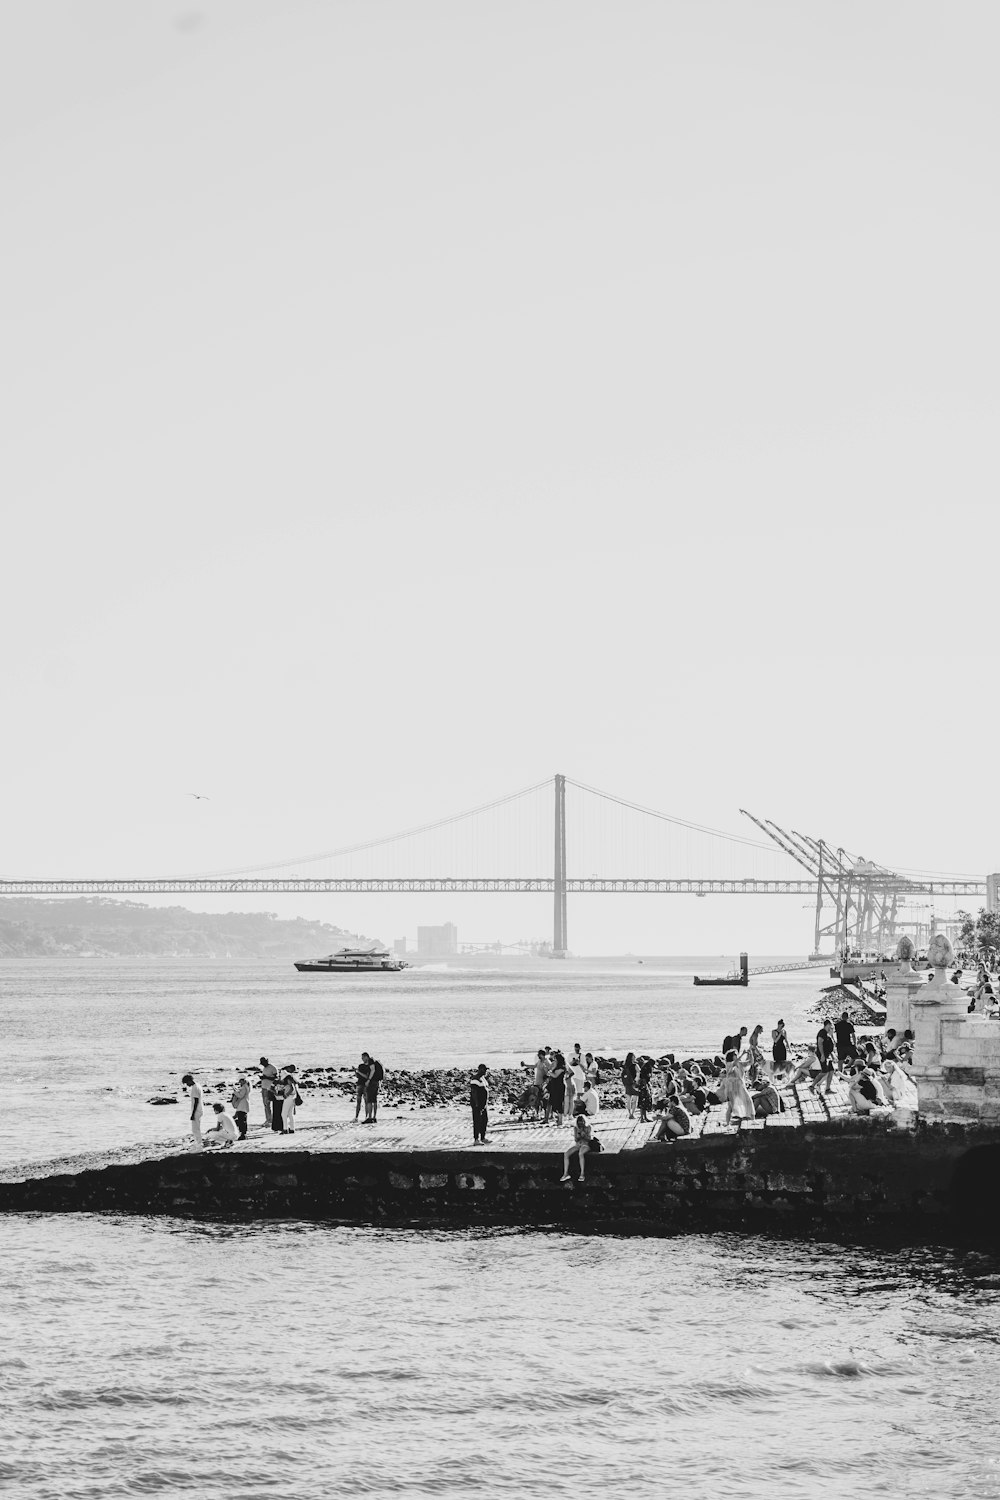 a black and white photo of people on a beach